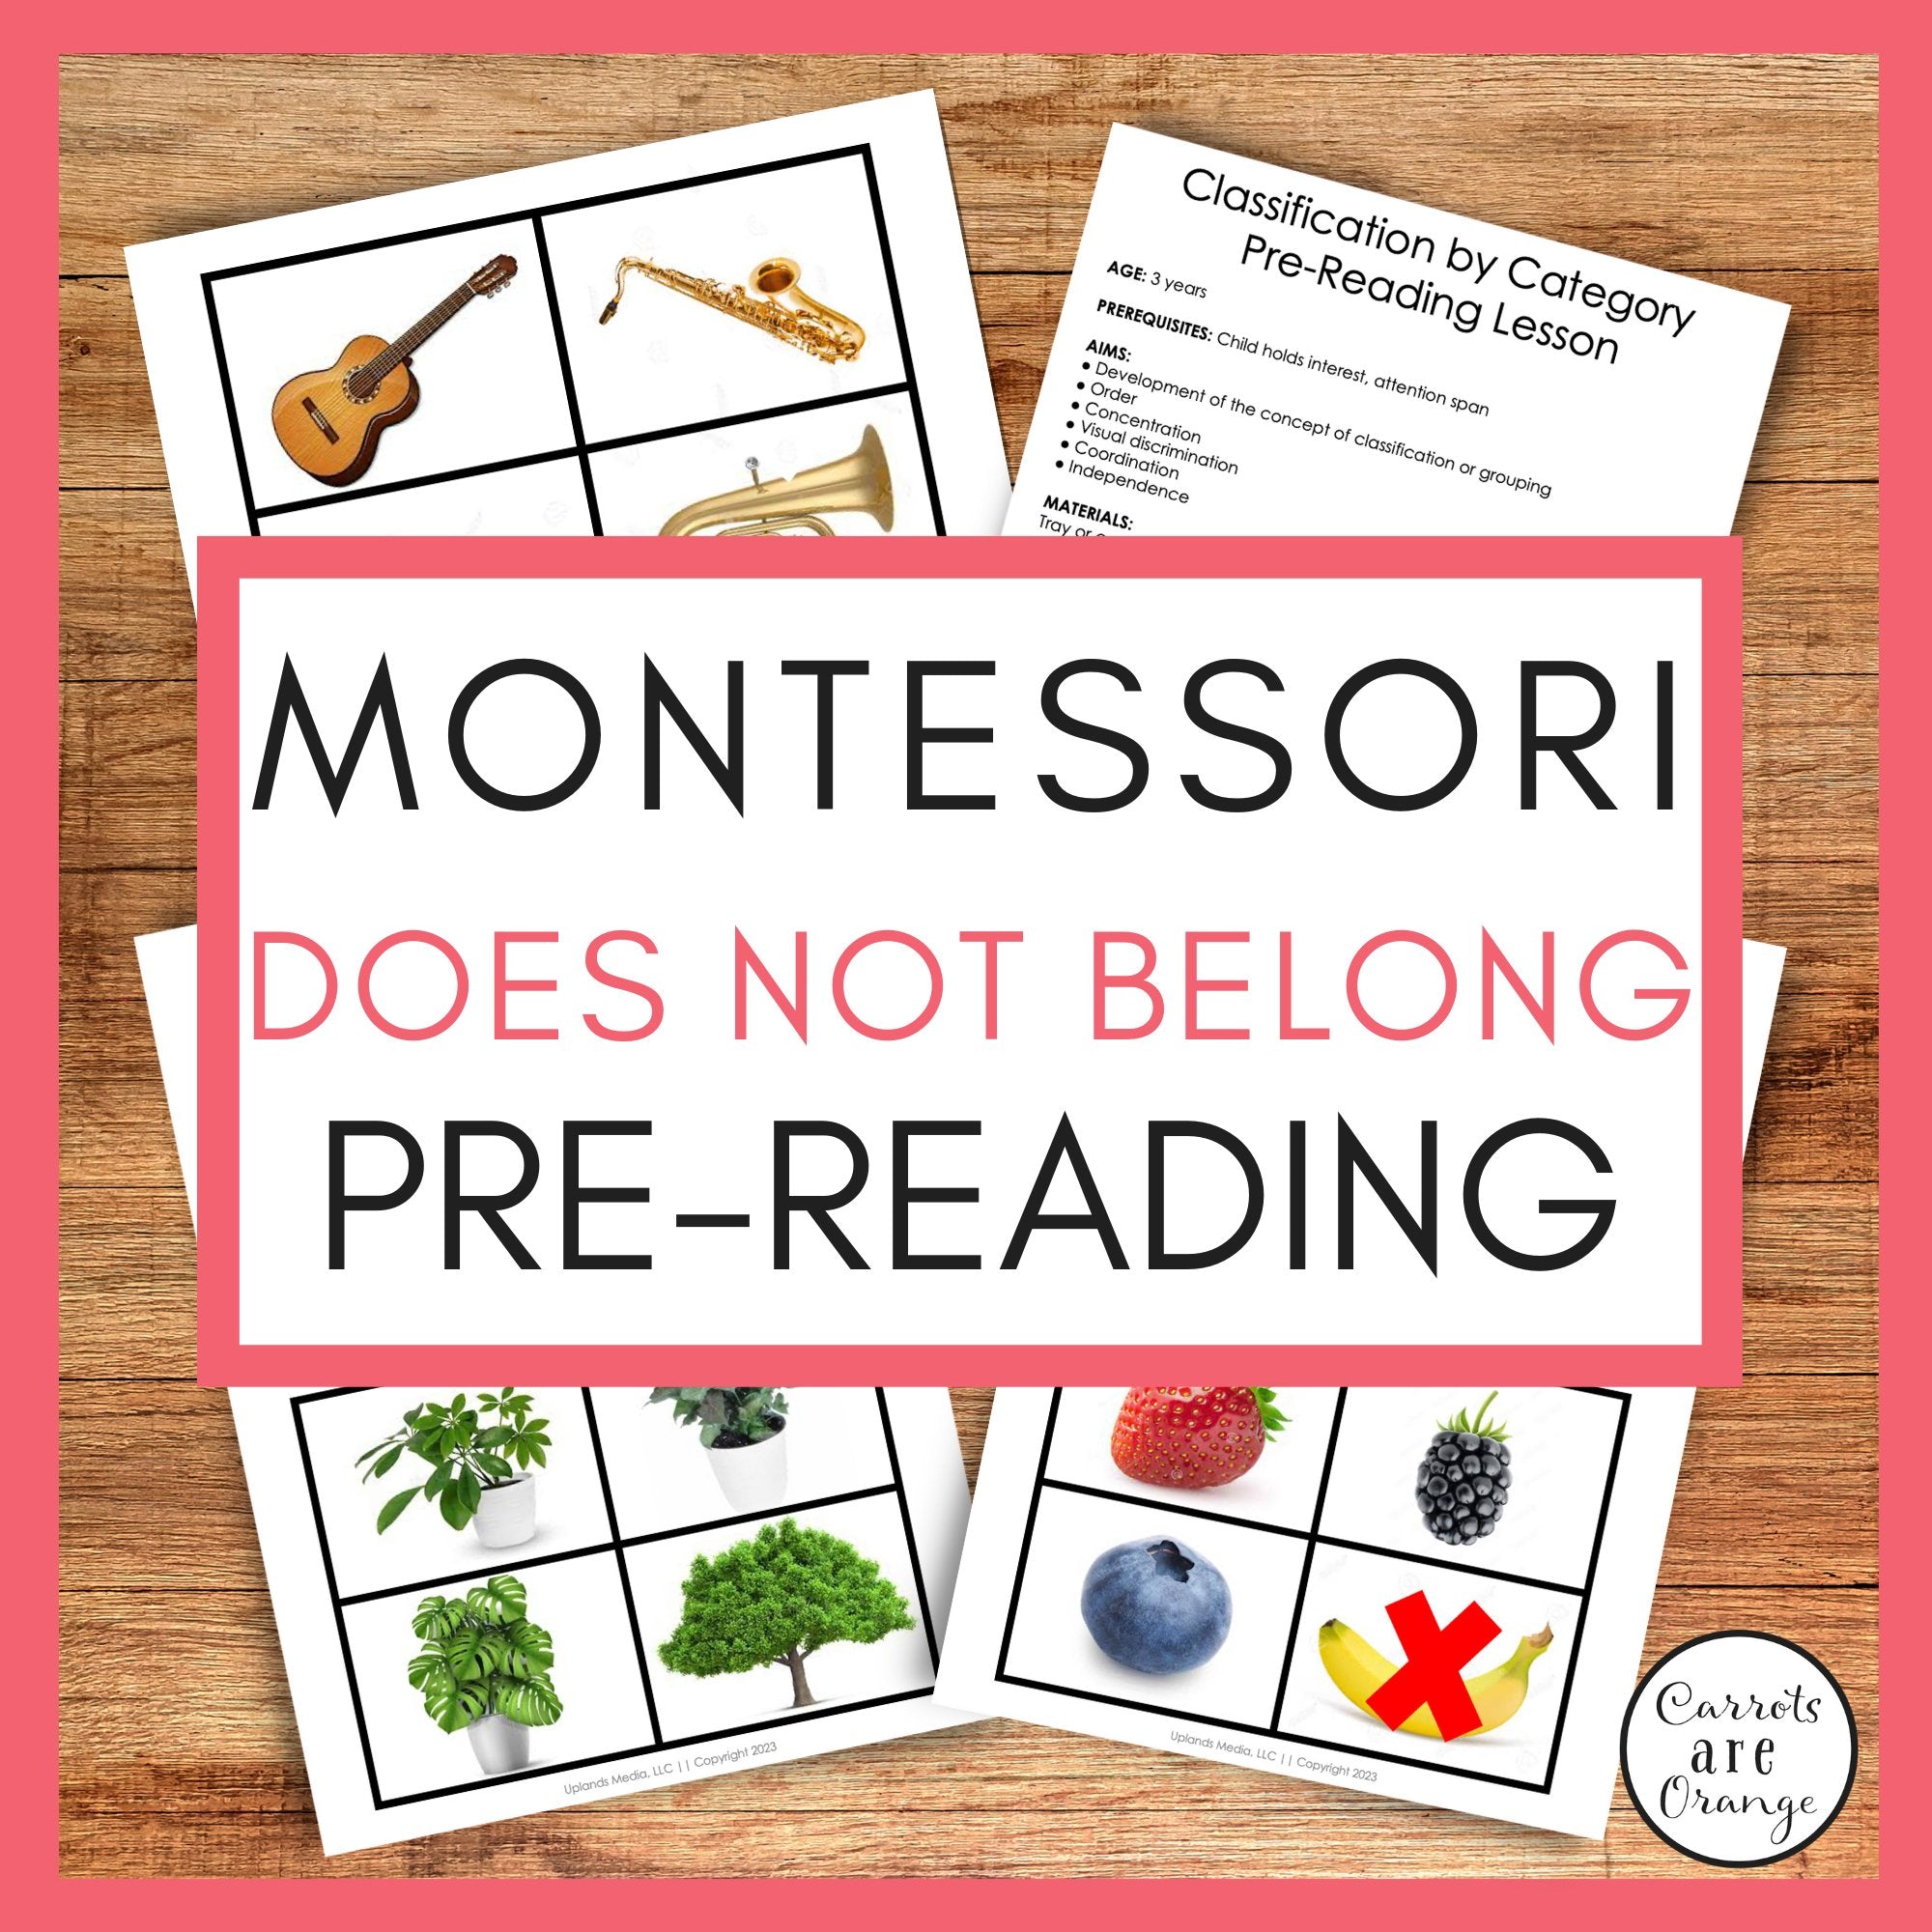 [Pre-Reading] "Does Not Belong" - Printables by Carrots Are Orange